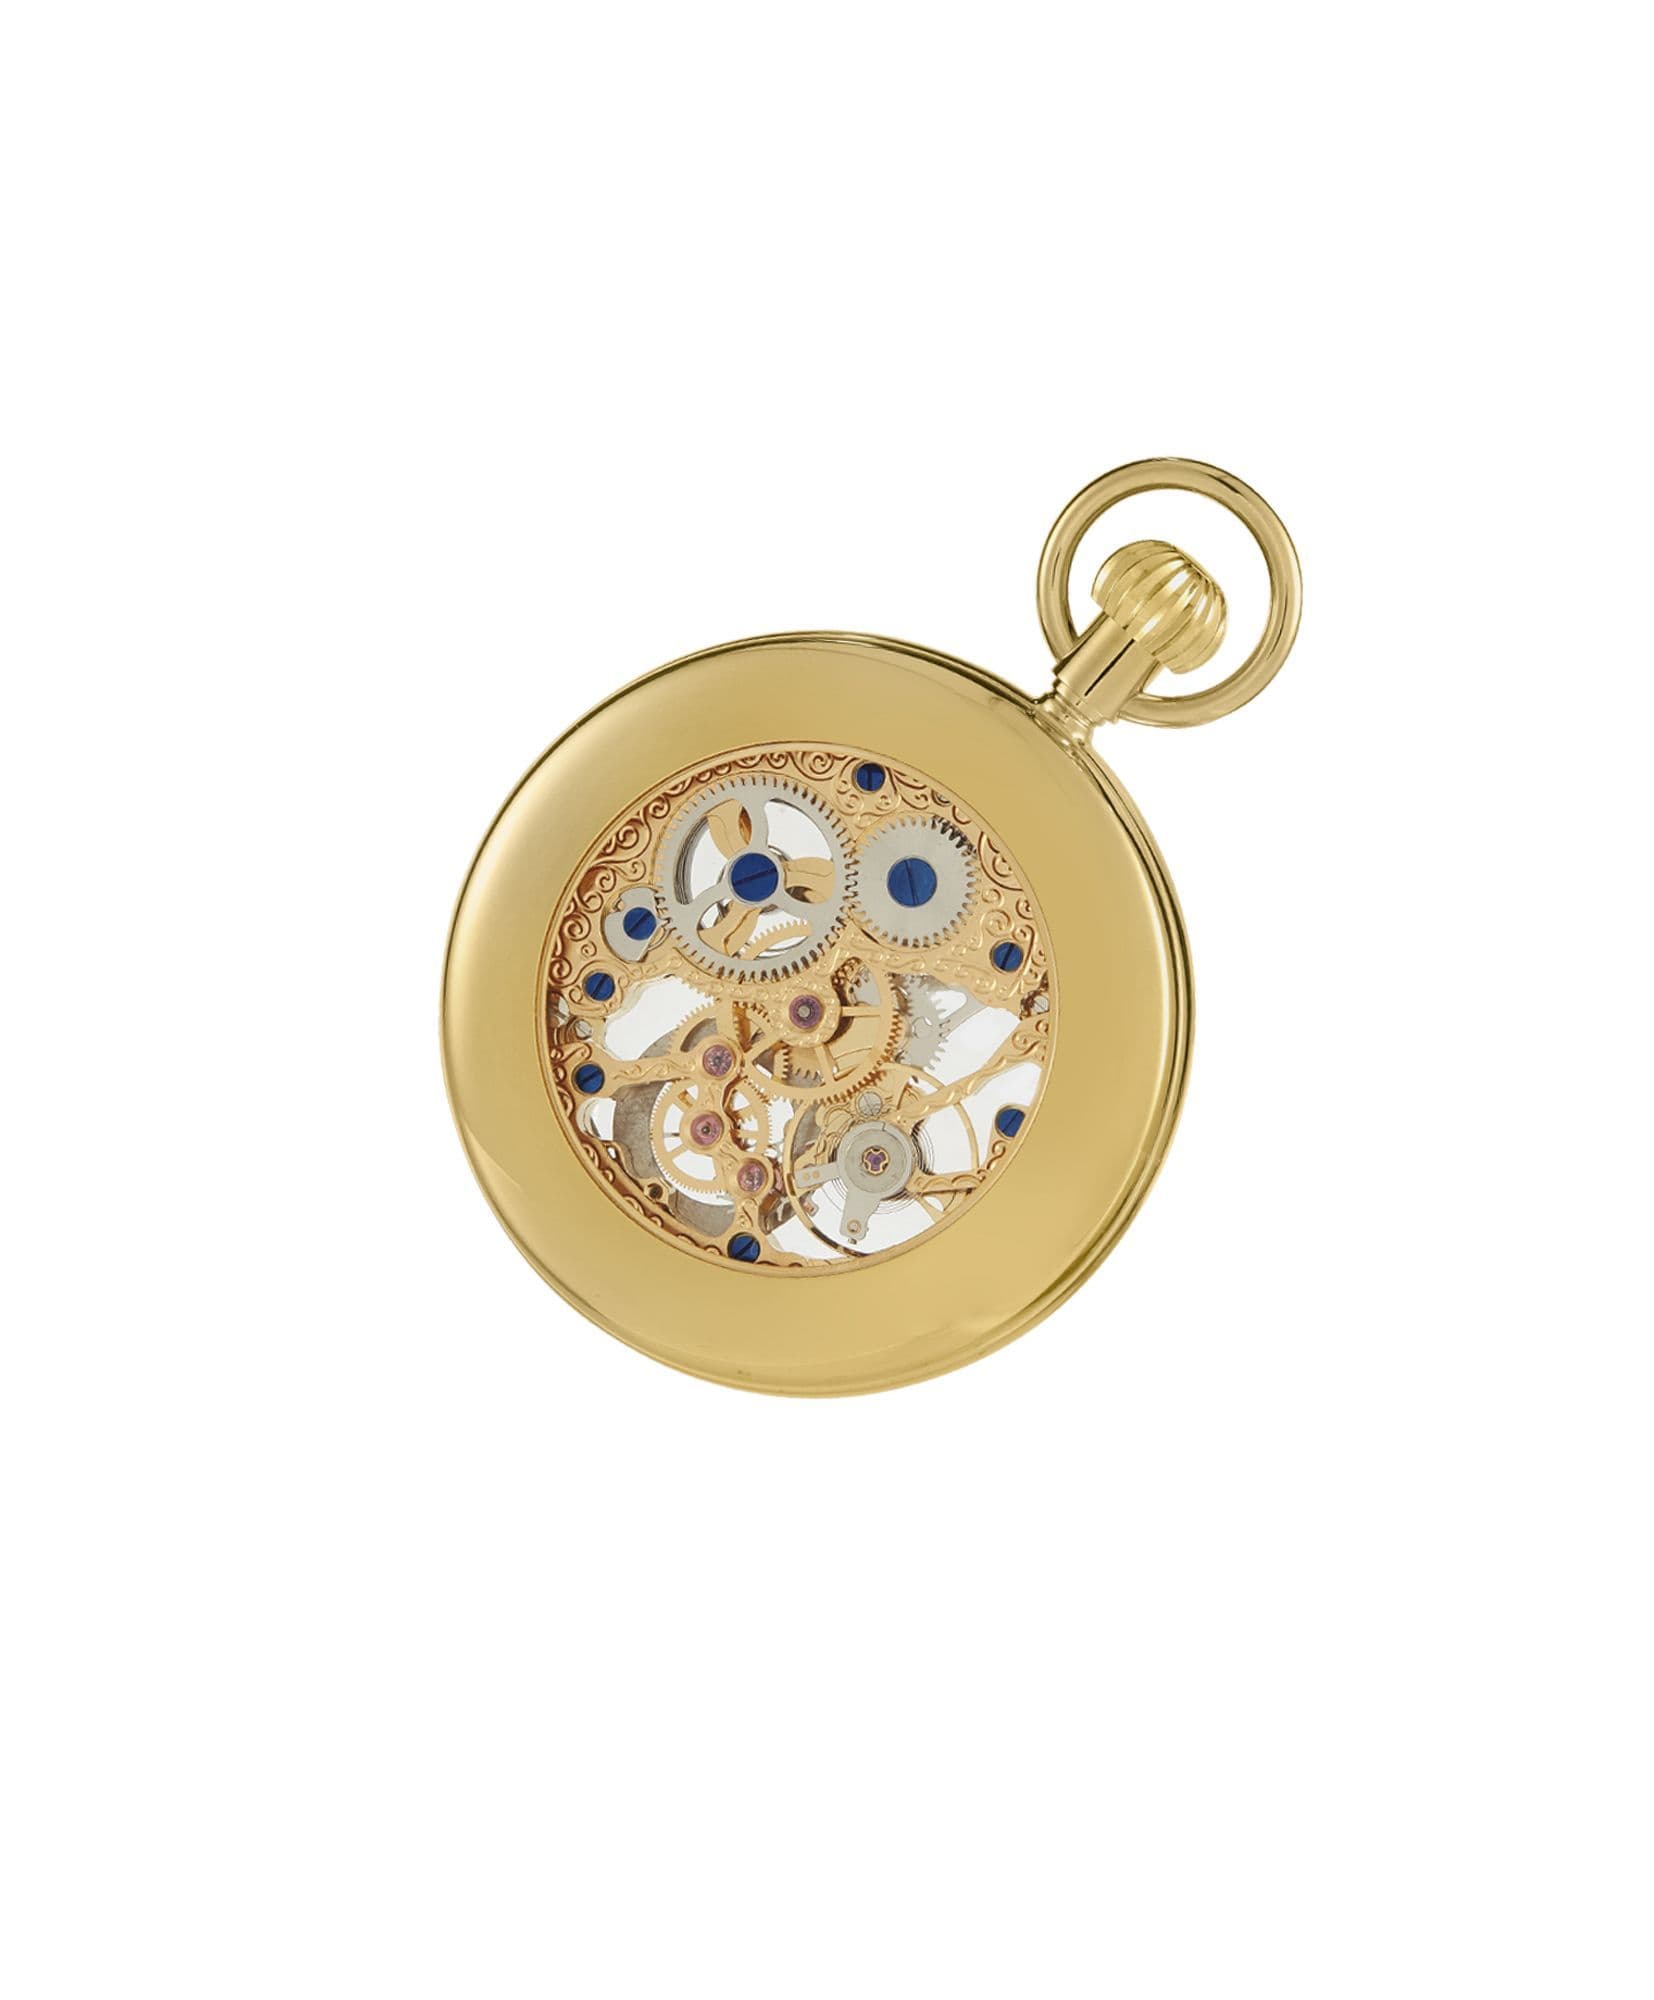 Mechanical Gold Plated Open Faced Pocket Watch With Chain